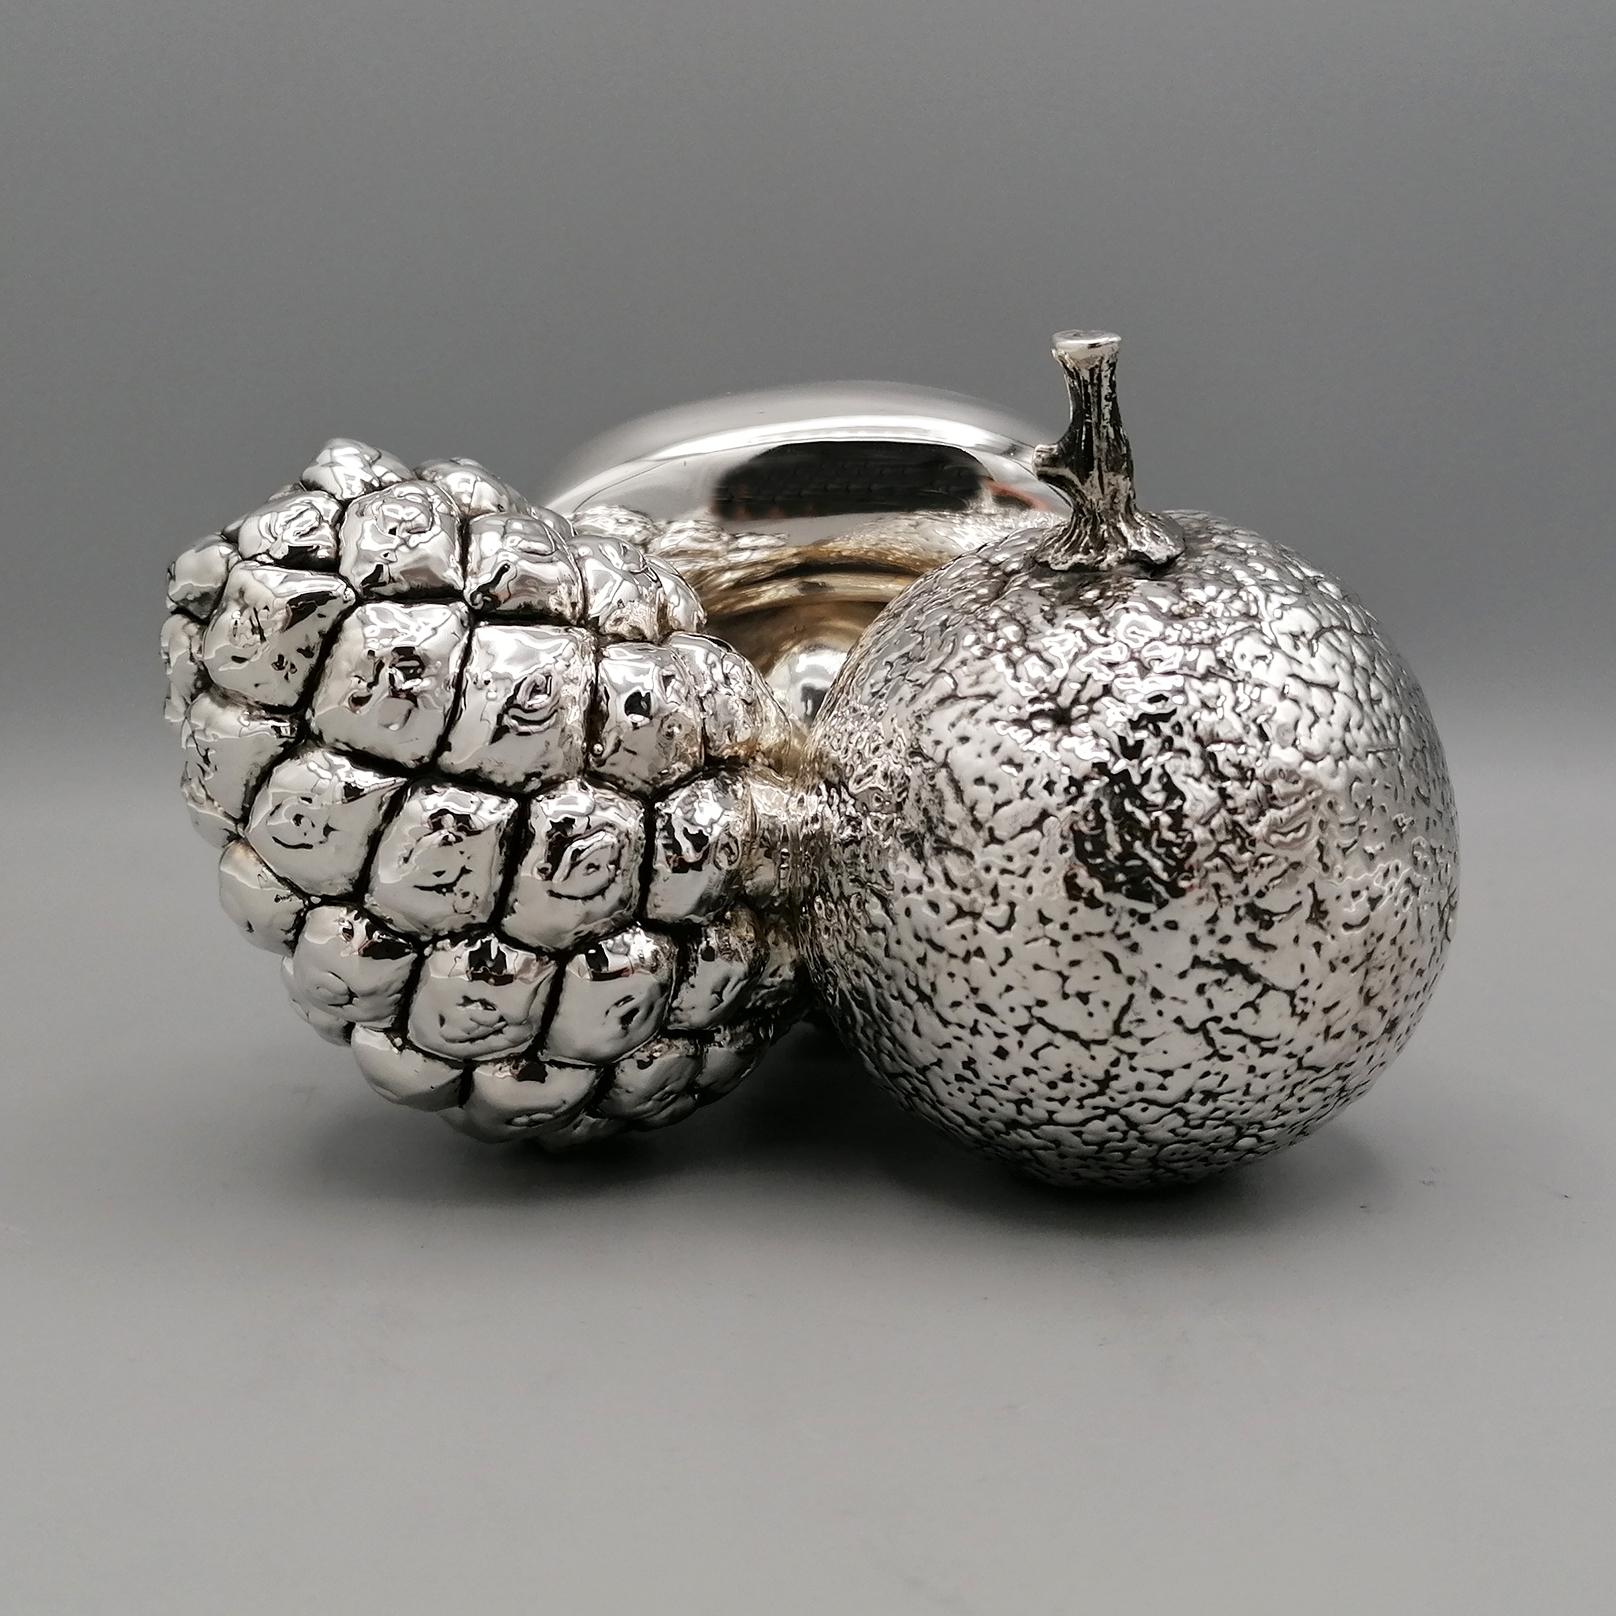 Hand-Crafted Fruit set - orange apple banana pine cone - in 999 silver For Sale